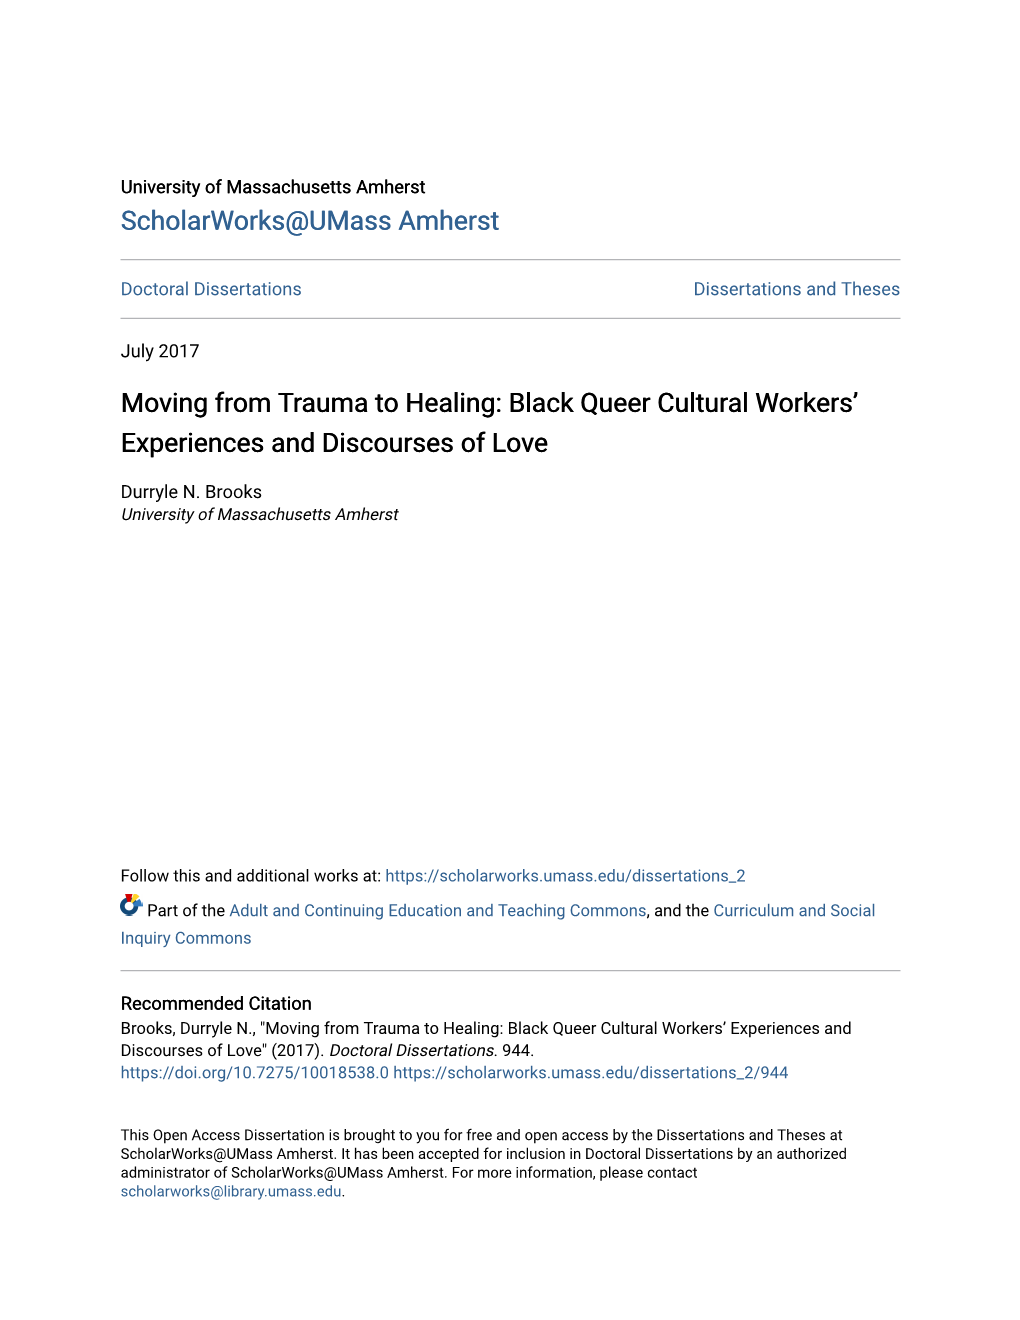 Moving from Trauma to Healing: Black Queer Cultural Workers’ Experiences and Discourses of Love